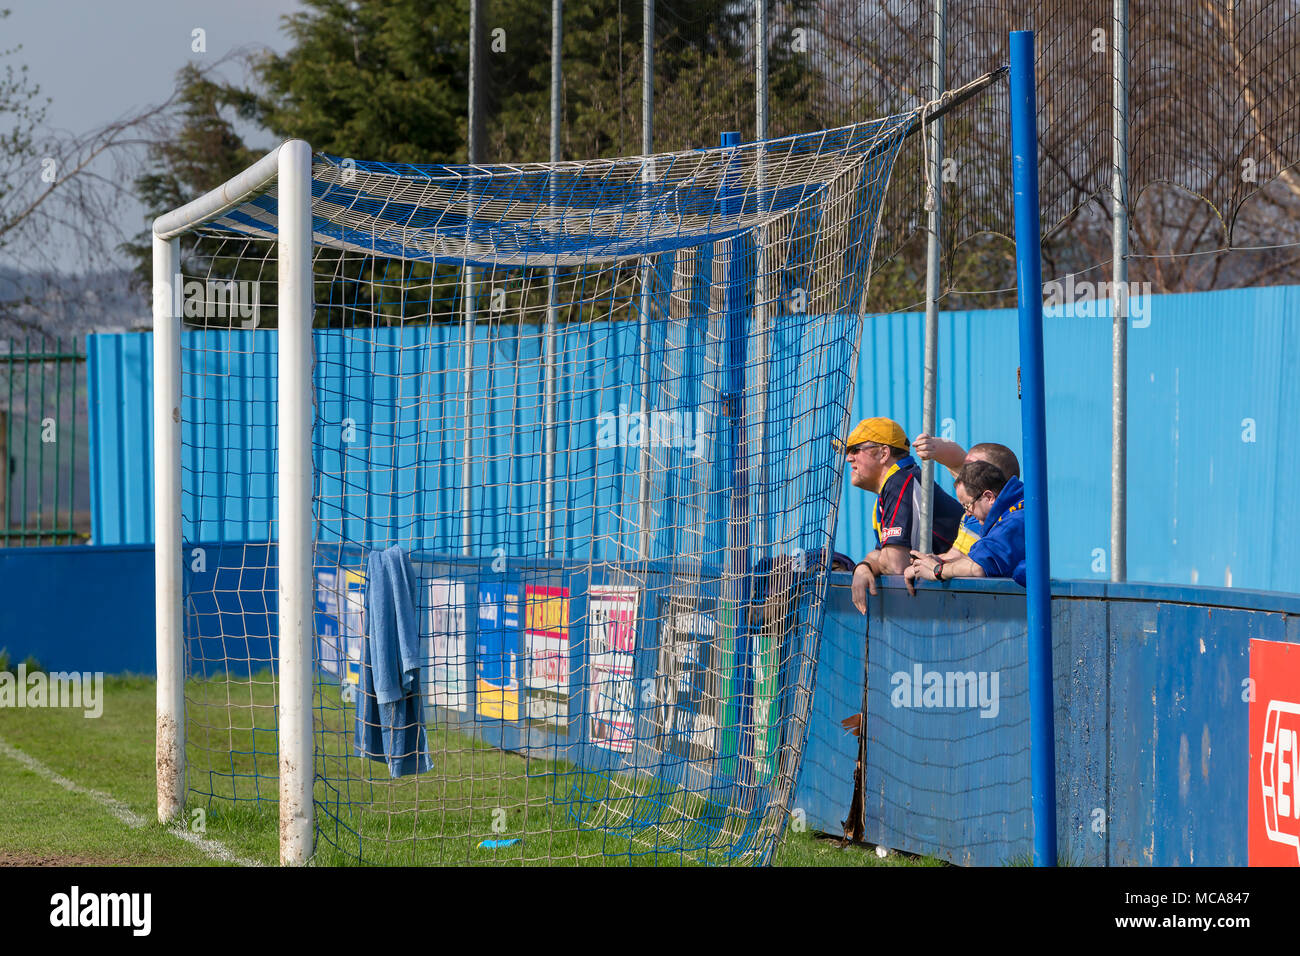 Three Warrington Town supporters stand behind the goal at Throstle Nest, Farsley during the match between Warrington Town FC and Farsley Celtic on 14 April 2018 where Warrington won 2 - 0 Credit: John Hopkins/Alamy Live News Stock Photo